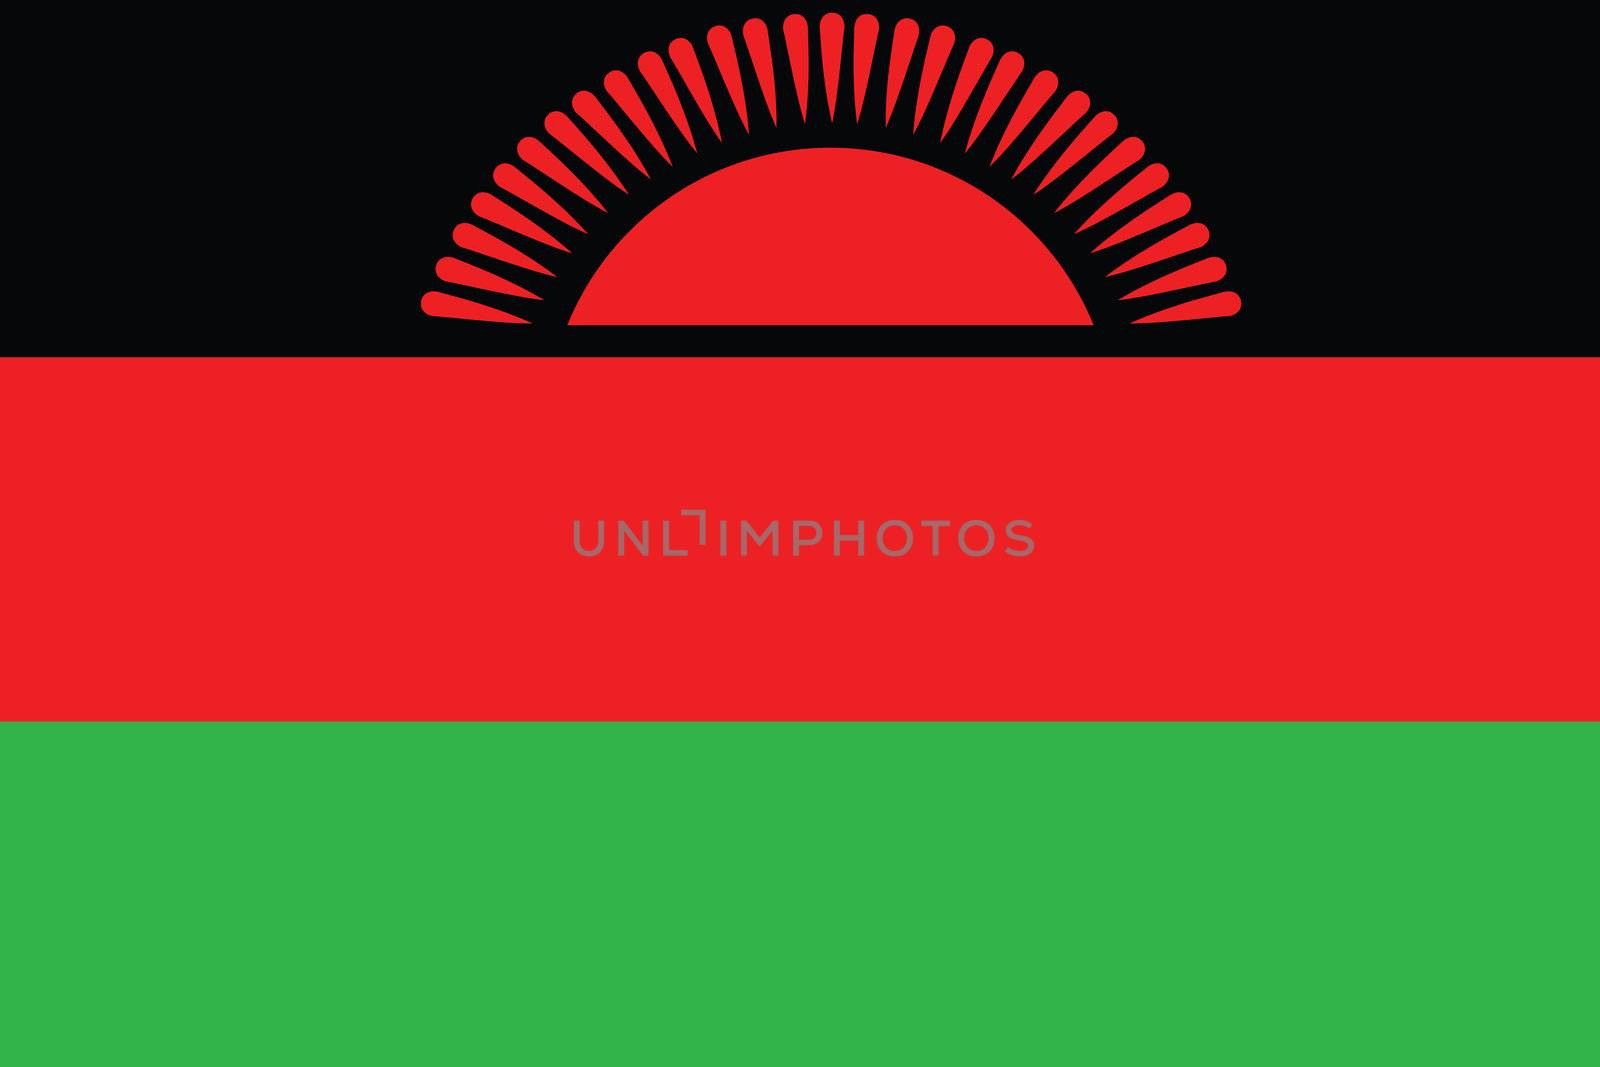 An Illustrated Drawing of the flag of Malawi